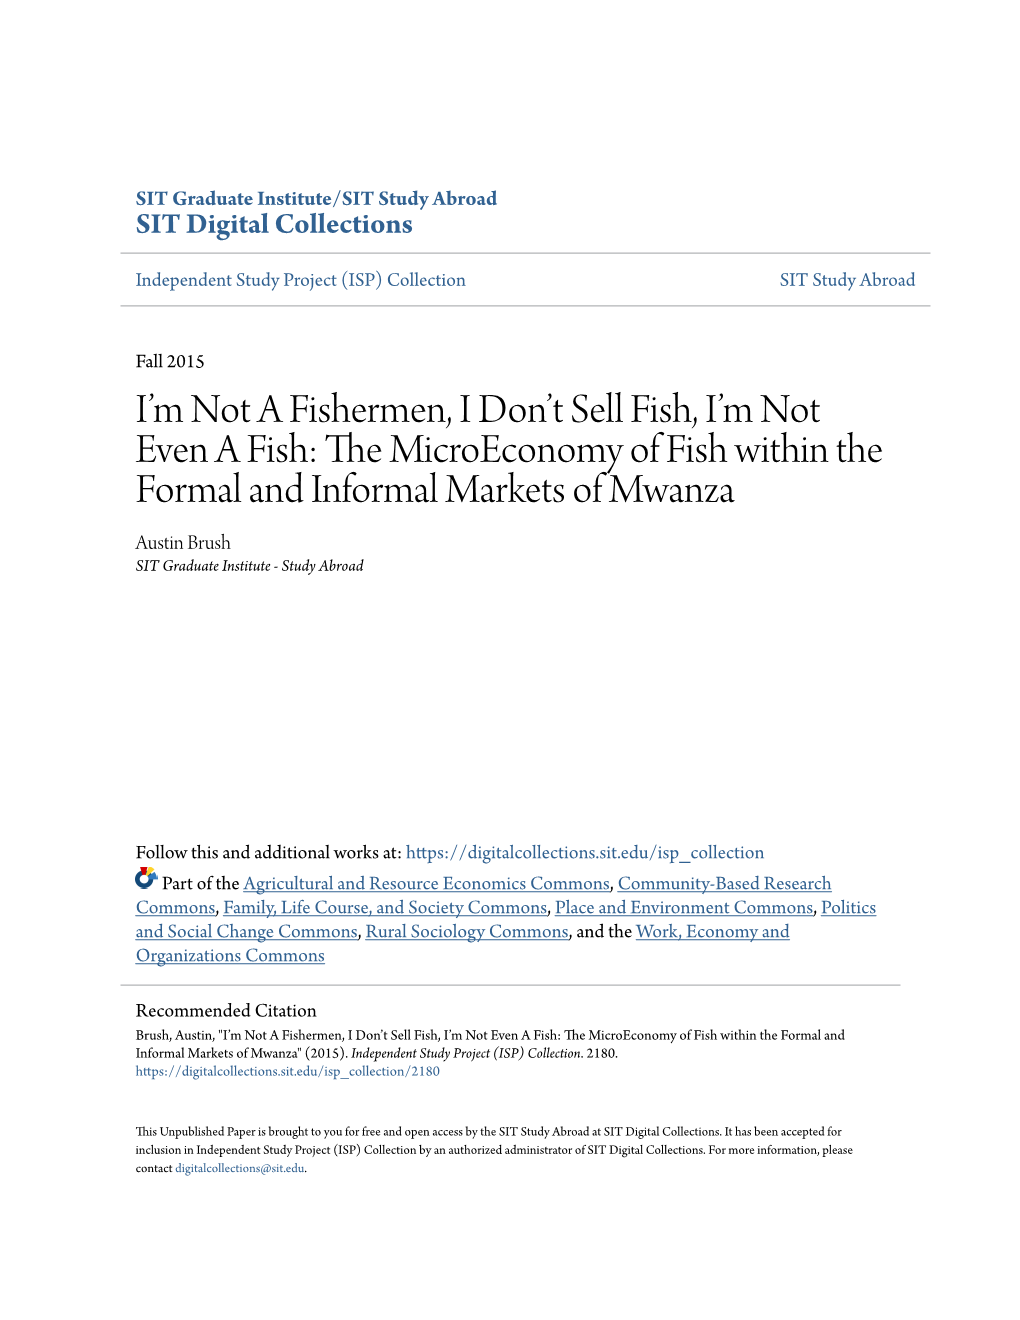 The Microeconomy of Fish Within the Formal and In